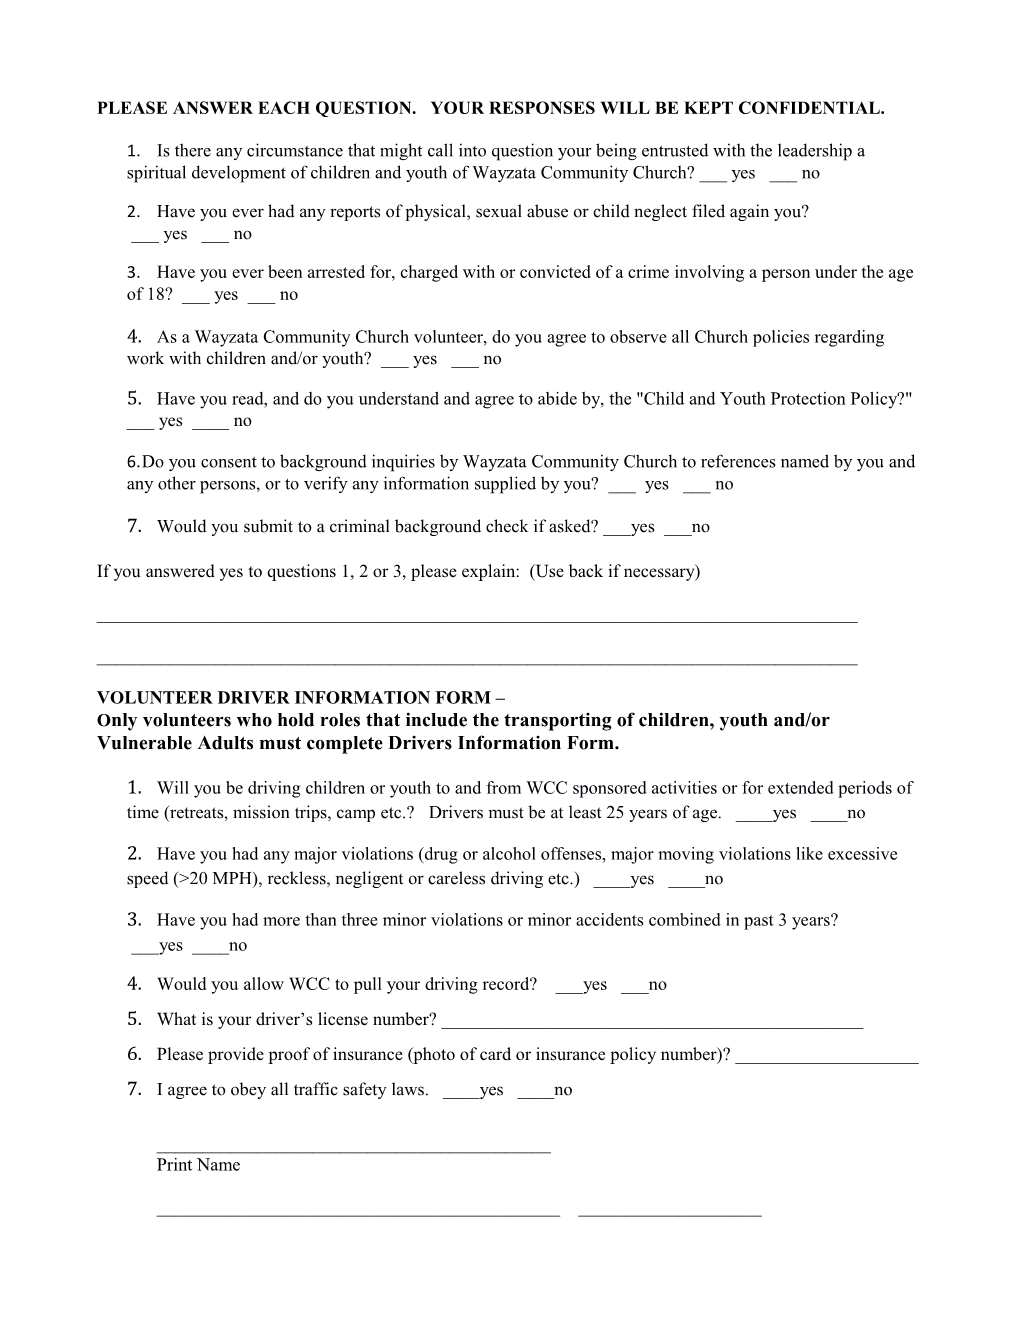 Child and Youth Volunteer Application Form